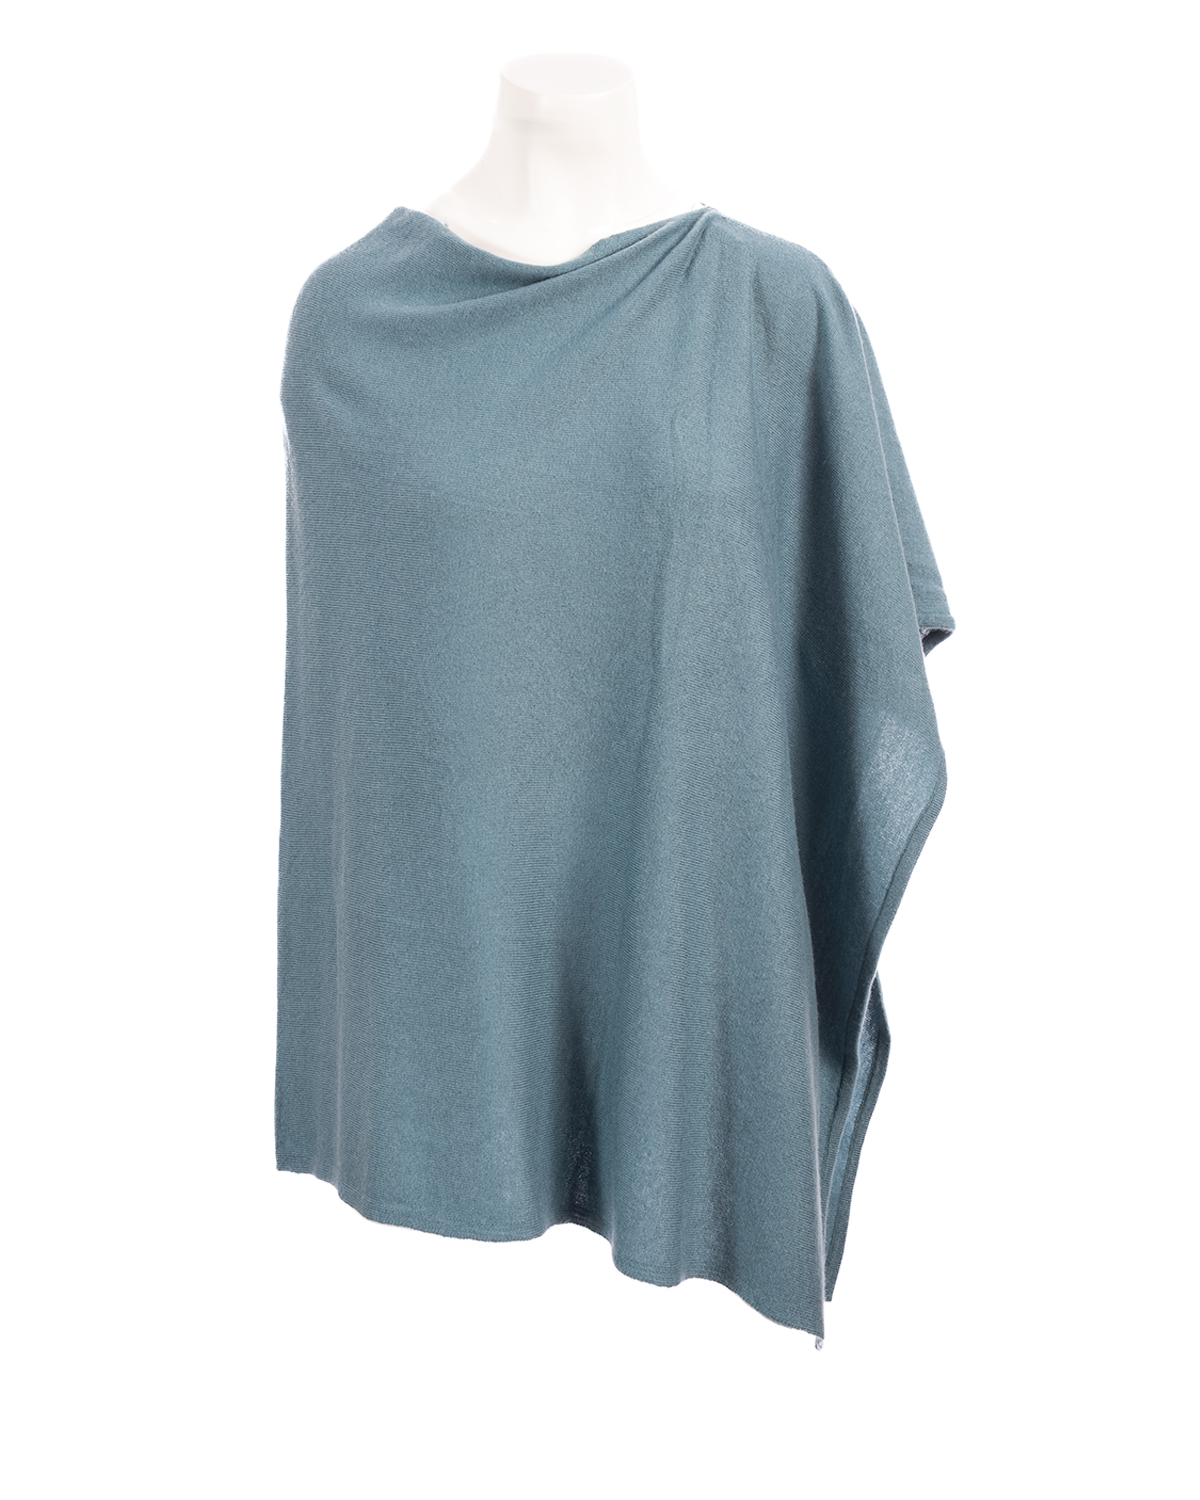 Cashmere Poncho Teal Blue